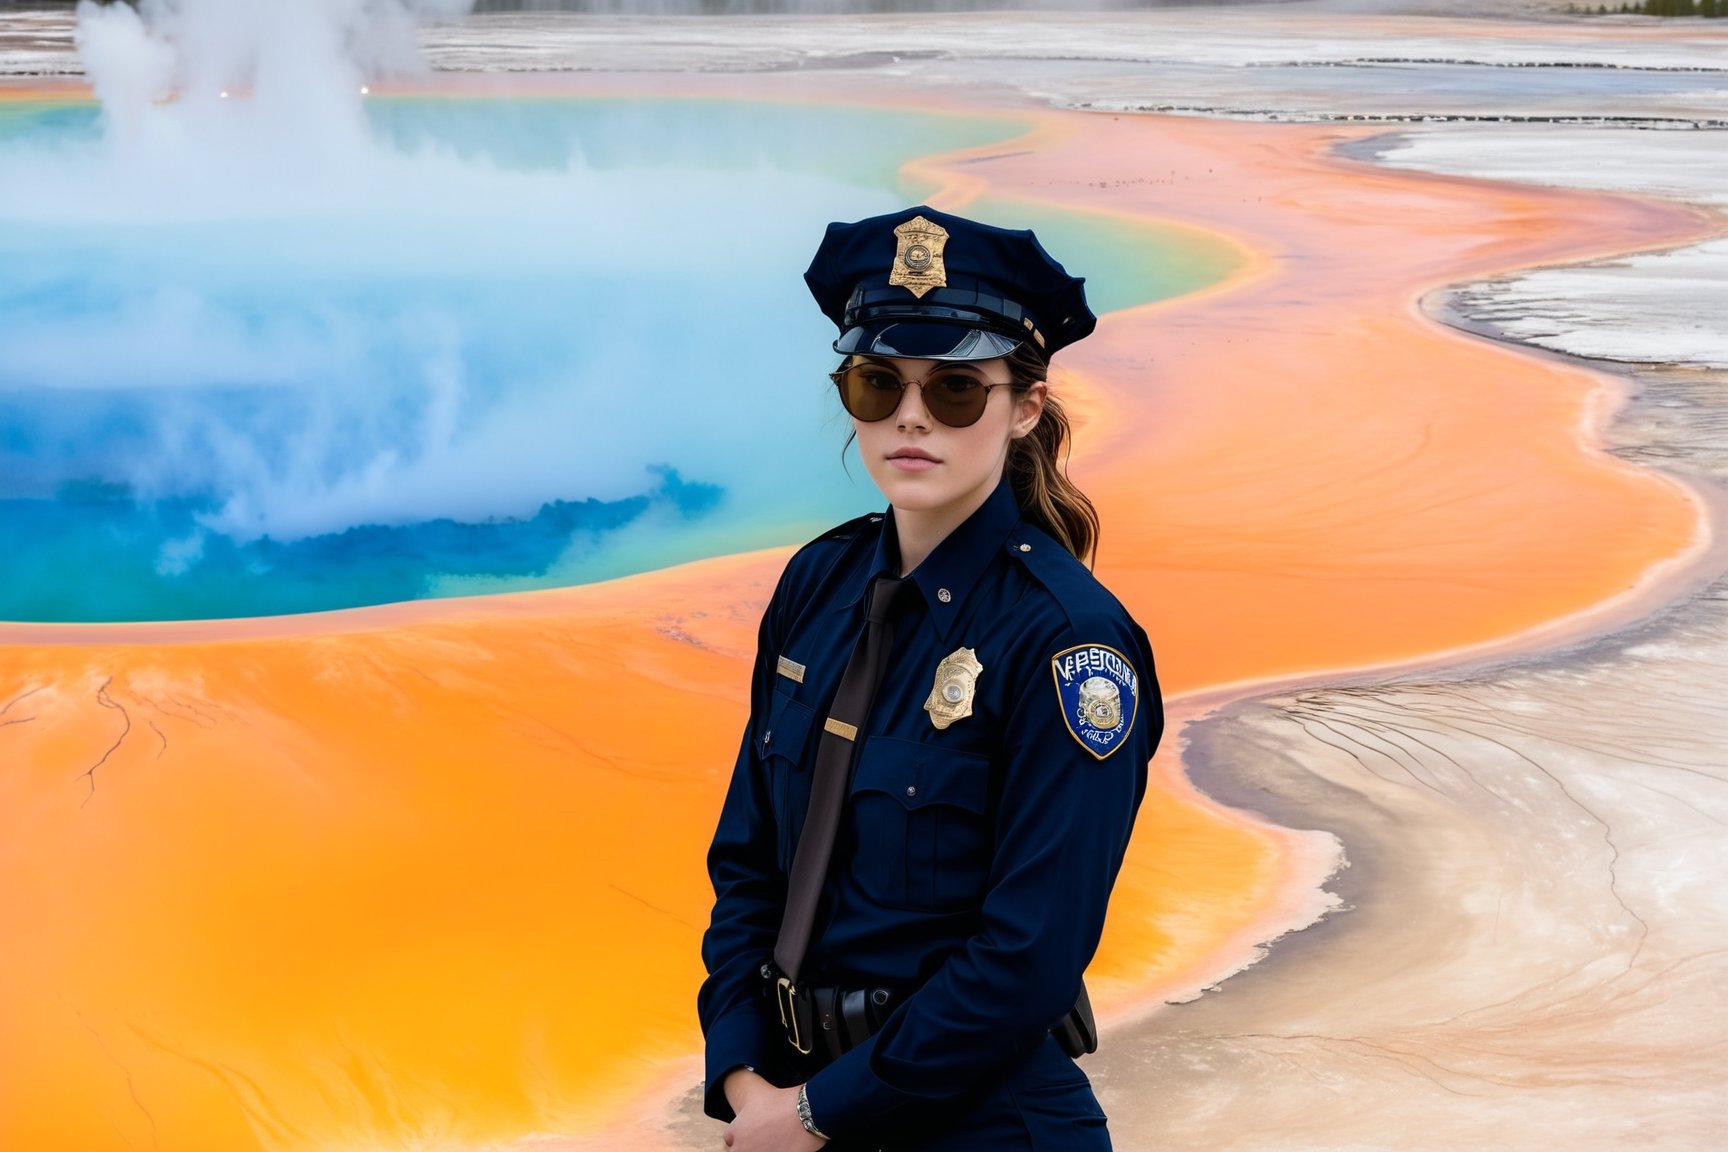 Hyper-Realistic photo of a beautiful LAPD police officer at Grand Prismatic Spring of Yellowstone, 20yo,1girl,solo,LAPD police uniform,cap,detailed exquisite face,soft shiny skin,smile,sunglasses,looking at viewer,Kristen Stewart lookalike,cap,fullbody:1.3
BREAK
backdrop:grandpr1smat1c,vivid color for Spring,orange mane-like soil around the pool,brown and white soil color,smoke from spring,brown and white color soil,1 spring,(girl focus),[cluttered maximalism]
BREAK
settings: (rule of thirds1.3),perfect composition,studio photo,trending on artstation,depth of perspective,(Masterpiece,Best quality,32k,UHD:1.4),(sharp focus,high contrast,HDR,hyper-detailed,intricate details,ultra-realistic,kodachrome 800:1.3),(cinematic lighting:1.3),(by Karol Bak$,Alessandro Pautasso$,Gustav Klimt$ and Hayao Miyazaki$:1.3),art_booster,photo_b00ster, real_booster,Ye11owst0ne